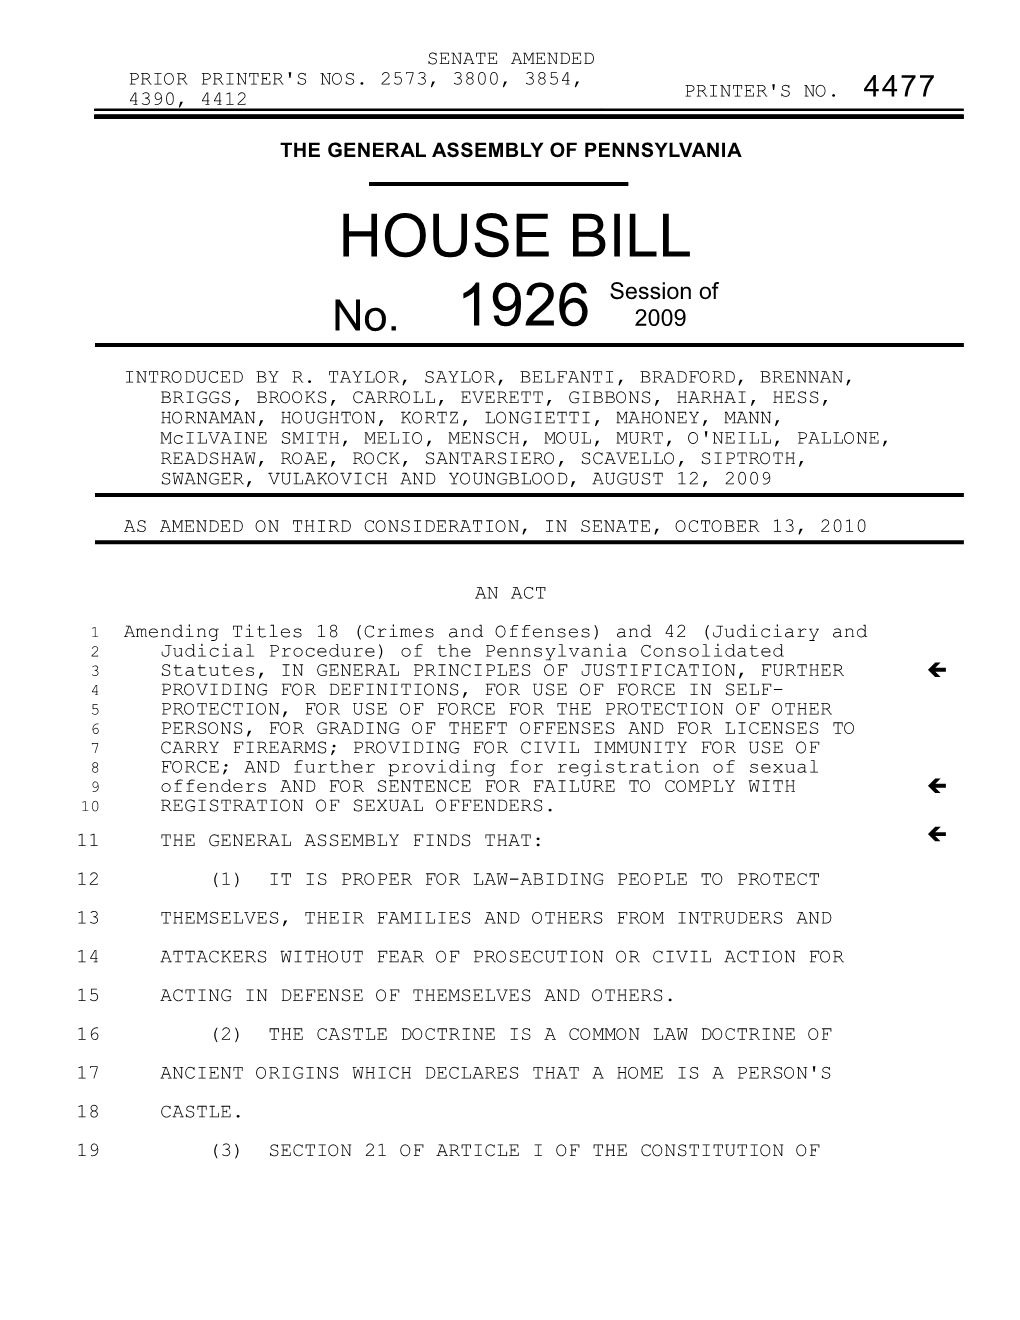 HOUSE BILL Session of No